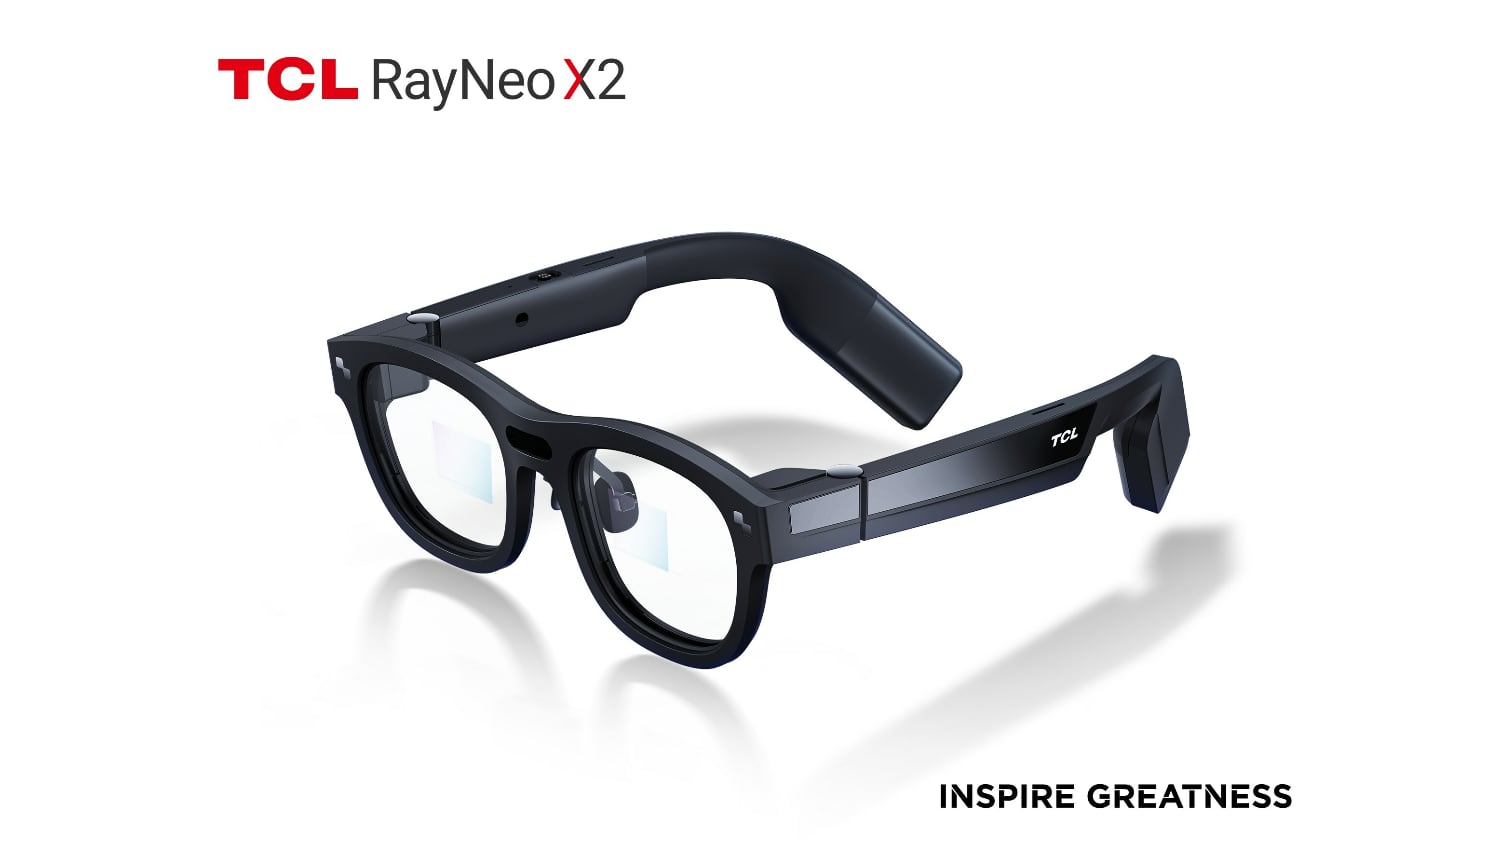 PR image of the TCL RayNeo X2 AR glasses with the product name and phrase " data-uuid="0722bccd-f5b8-3919-8af8-750a5dc449c5